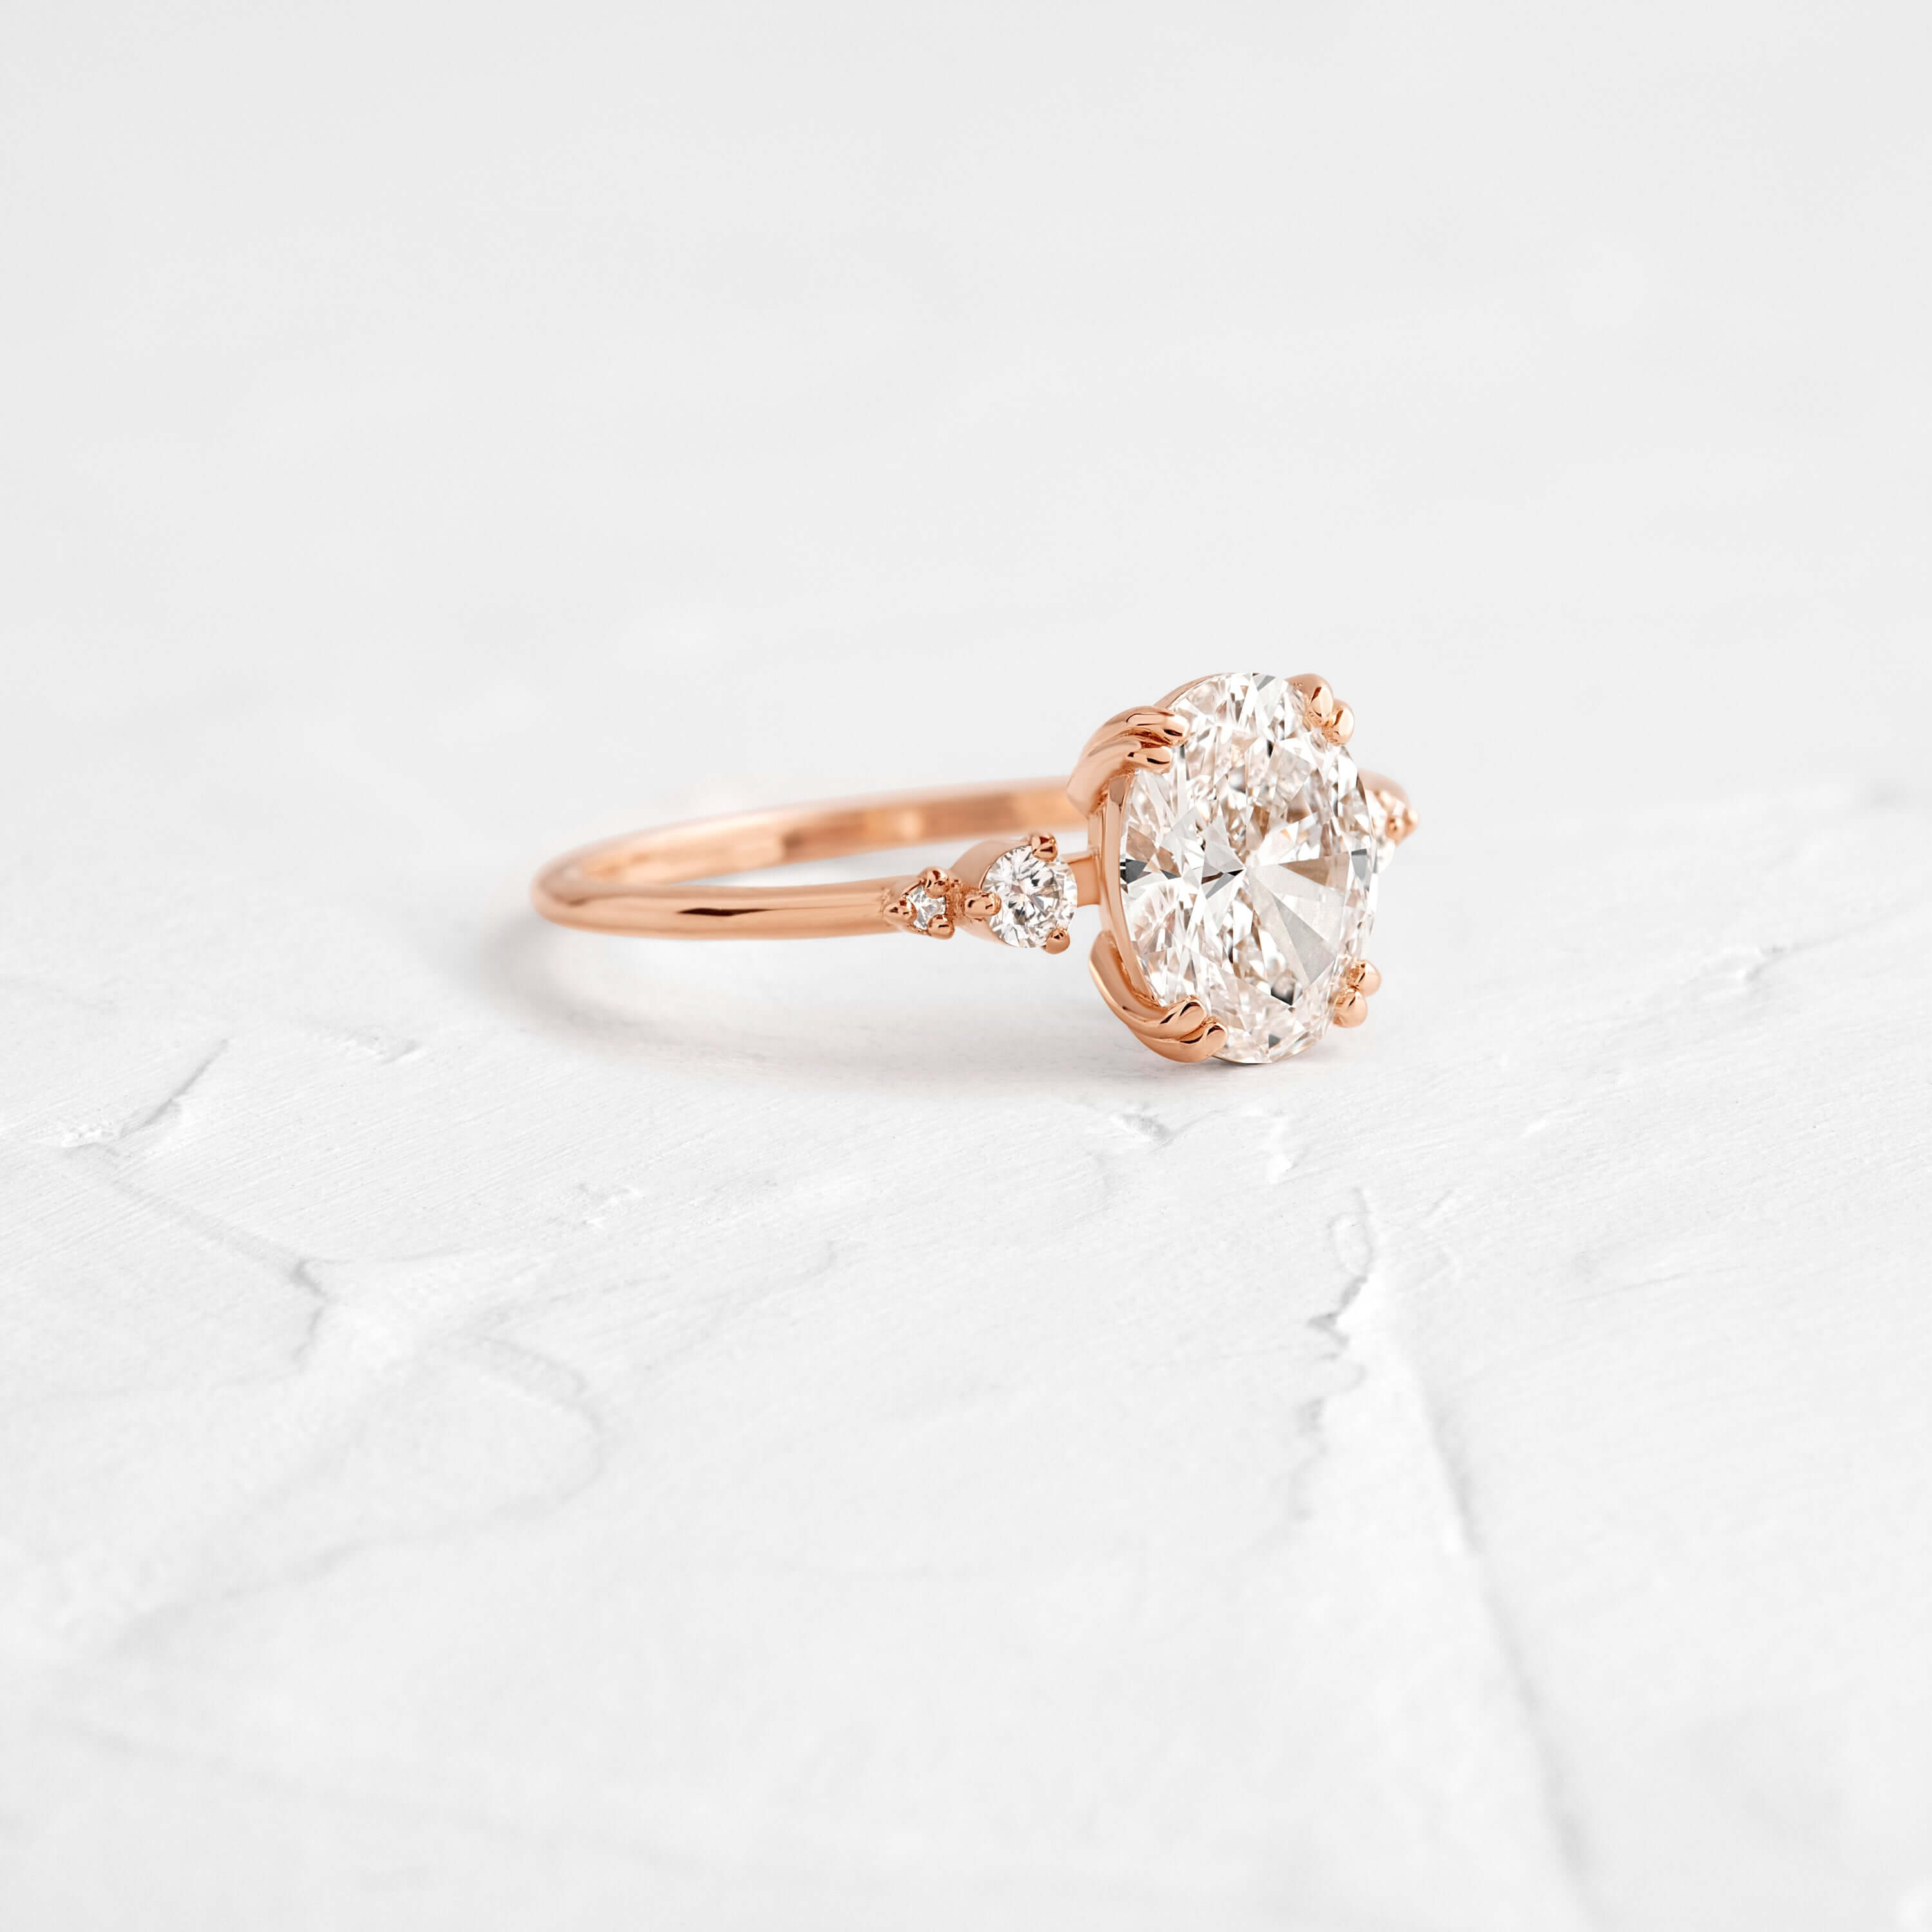 Pictorial Ring, Oval Cut | Melanie Casey Fine Jewelry | Engagement Ring